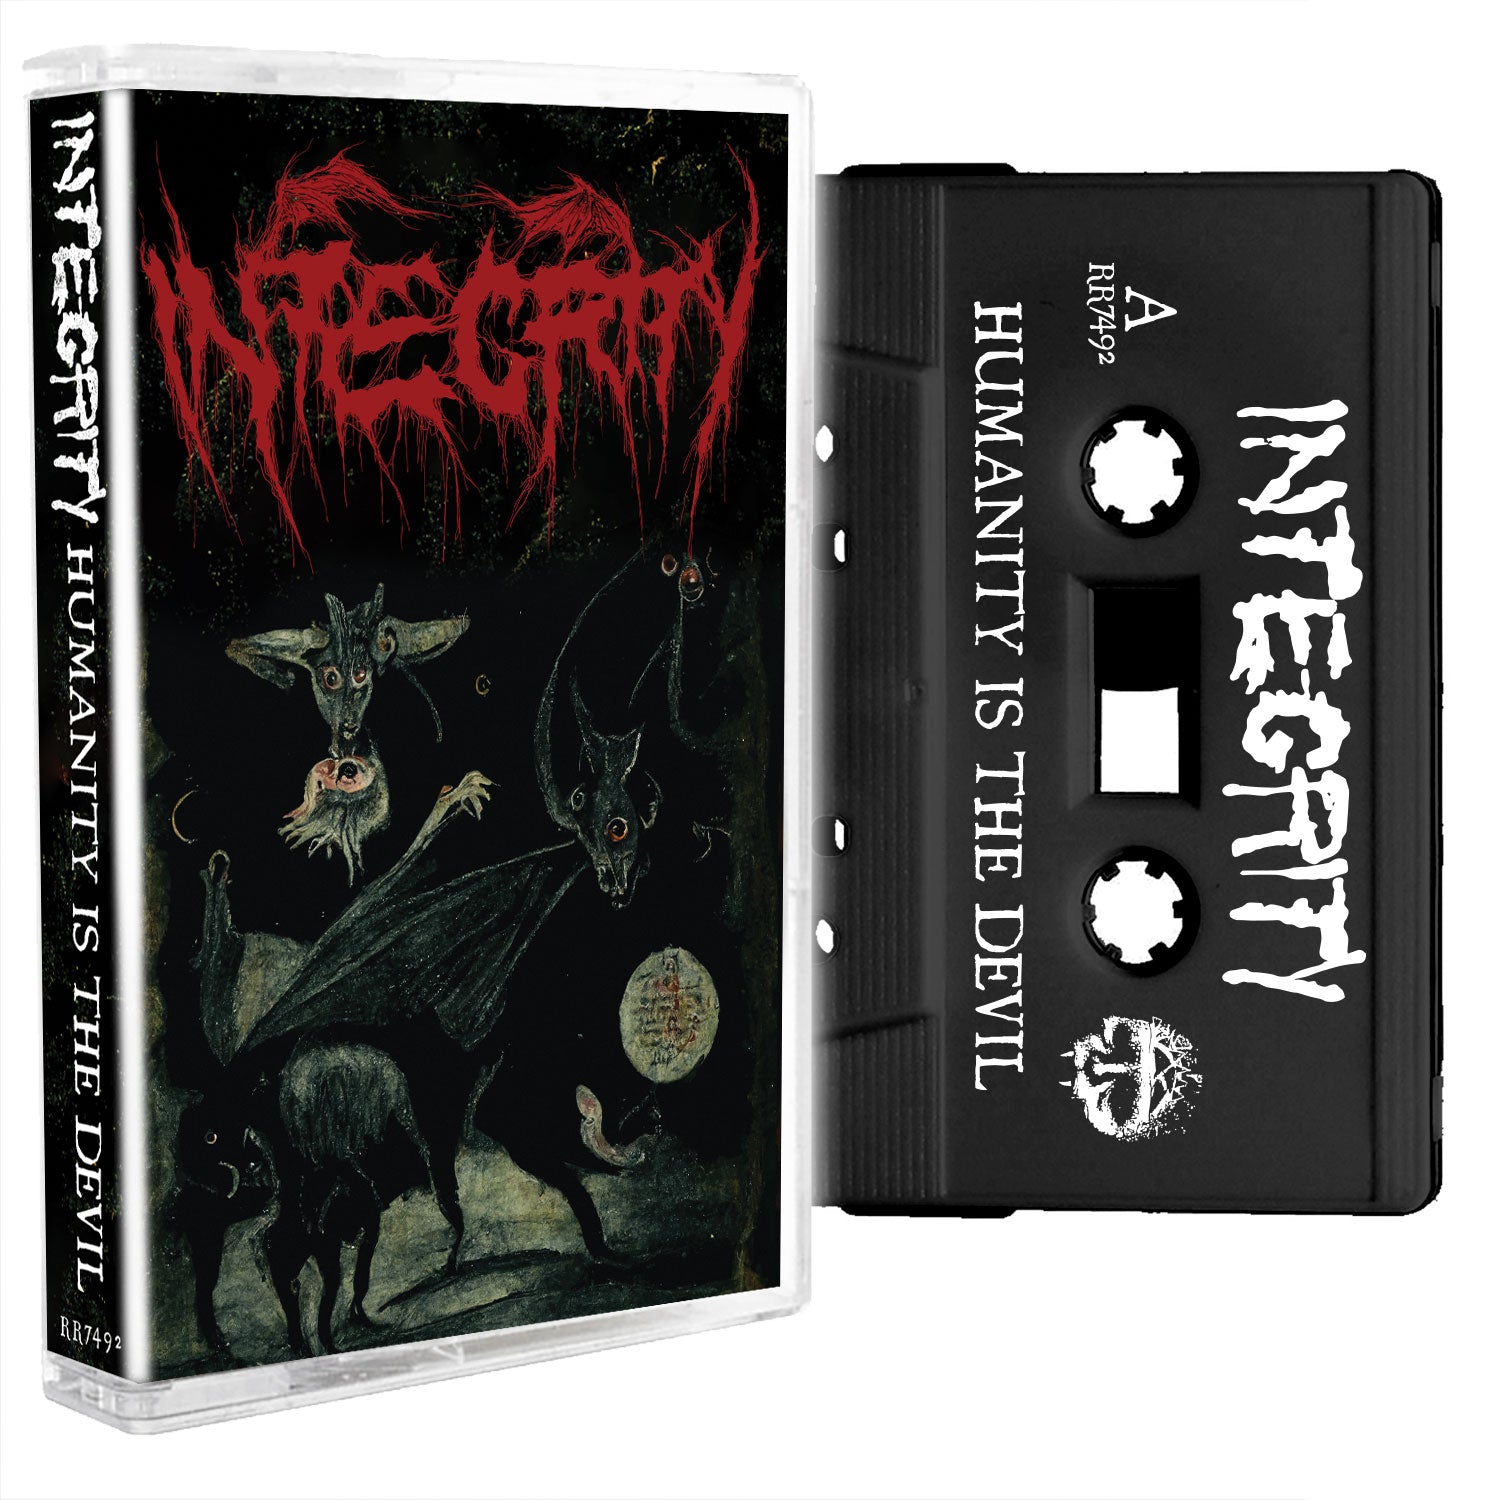 Integrity "Humanity Is the Devil (Reissue)" Cassette